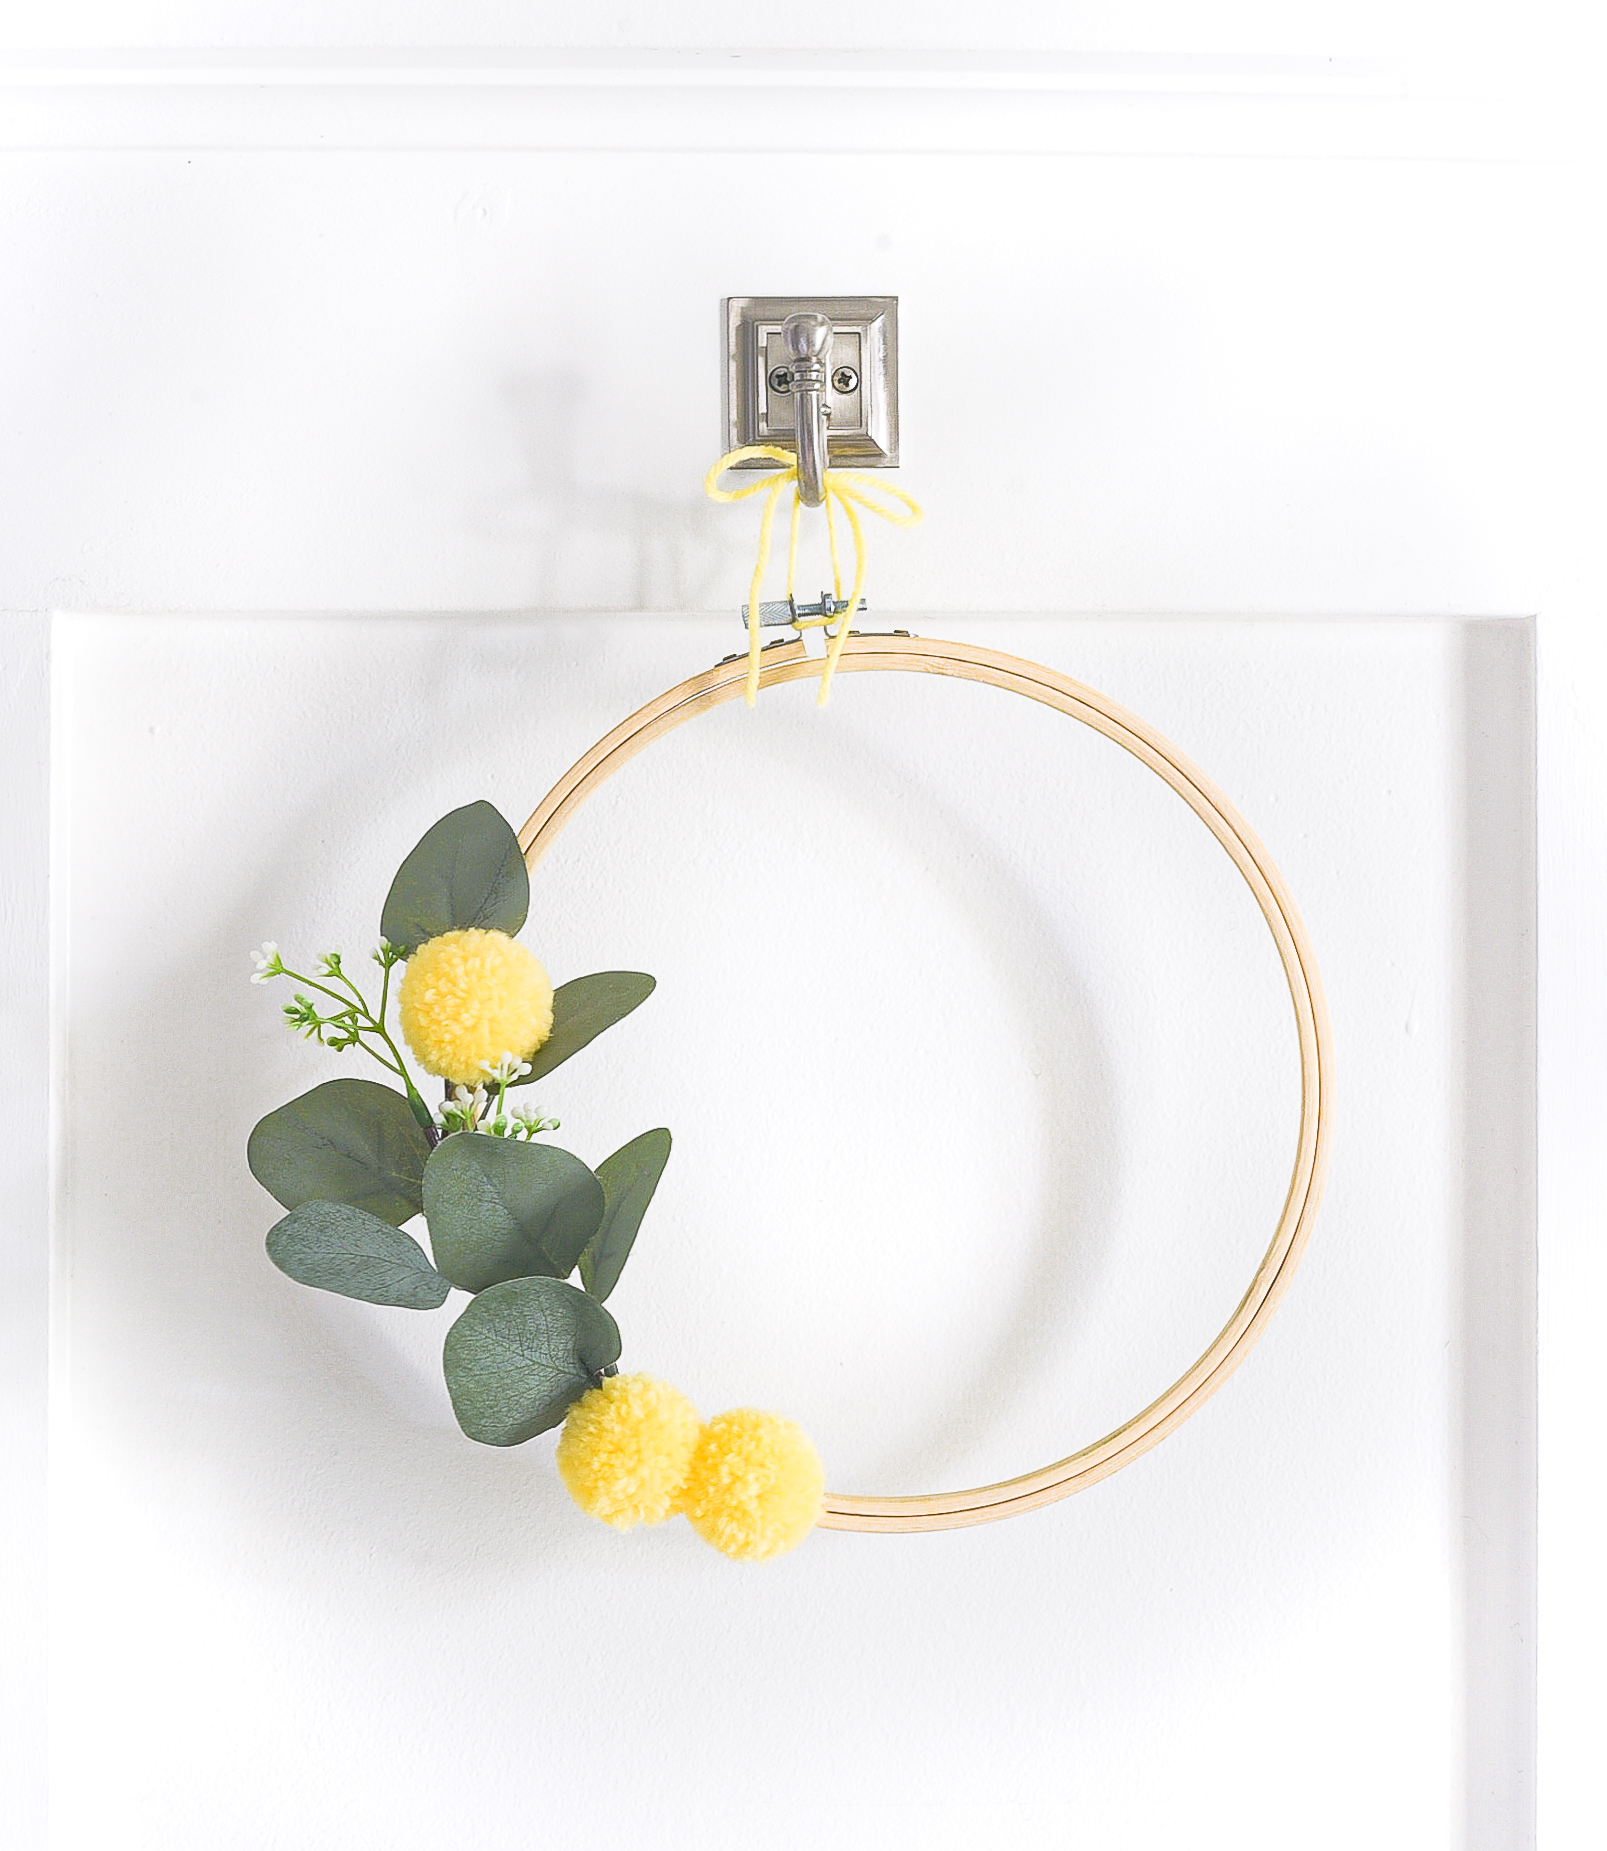 Embroidery Hoop Wreath with Faux Bill Ball Pom Poms - Yellow Summer Wreath Idea. Summer Embroidery Hoop Wreath with Faux Bill Ball Pom Poms.